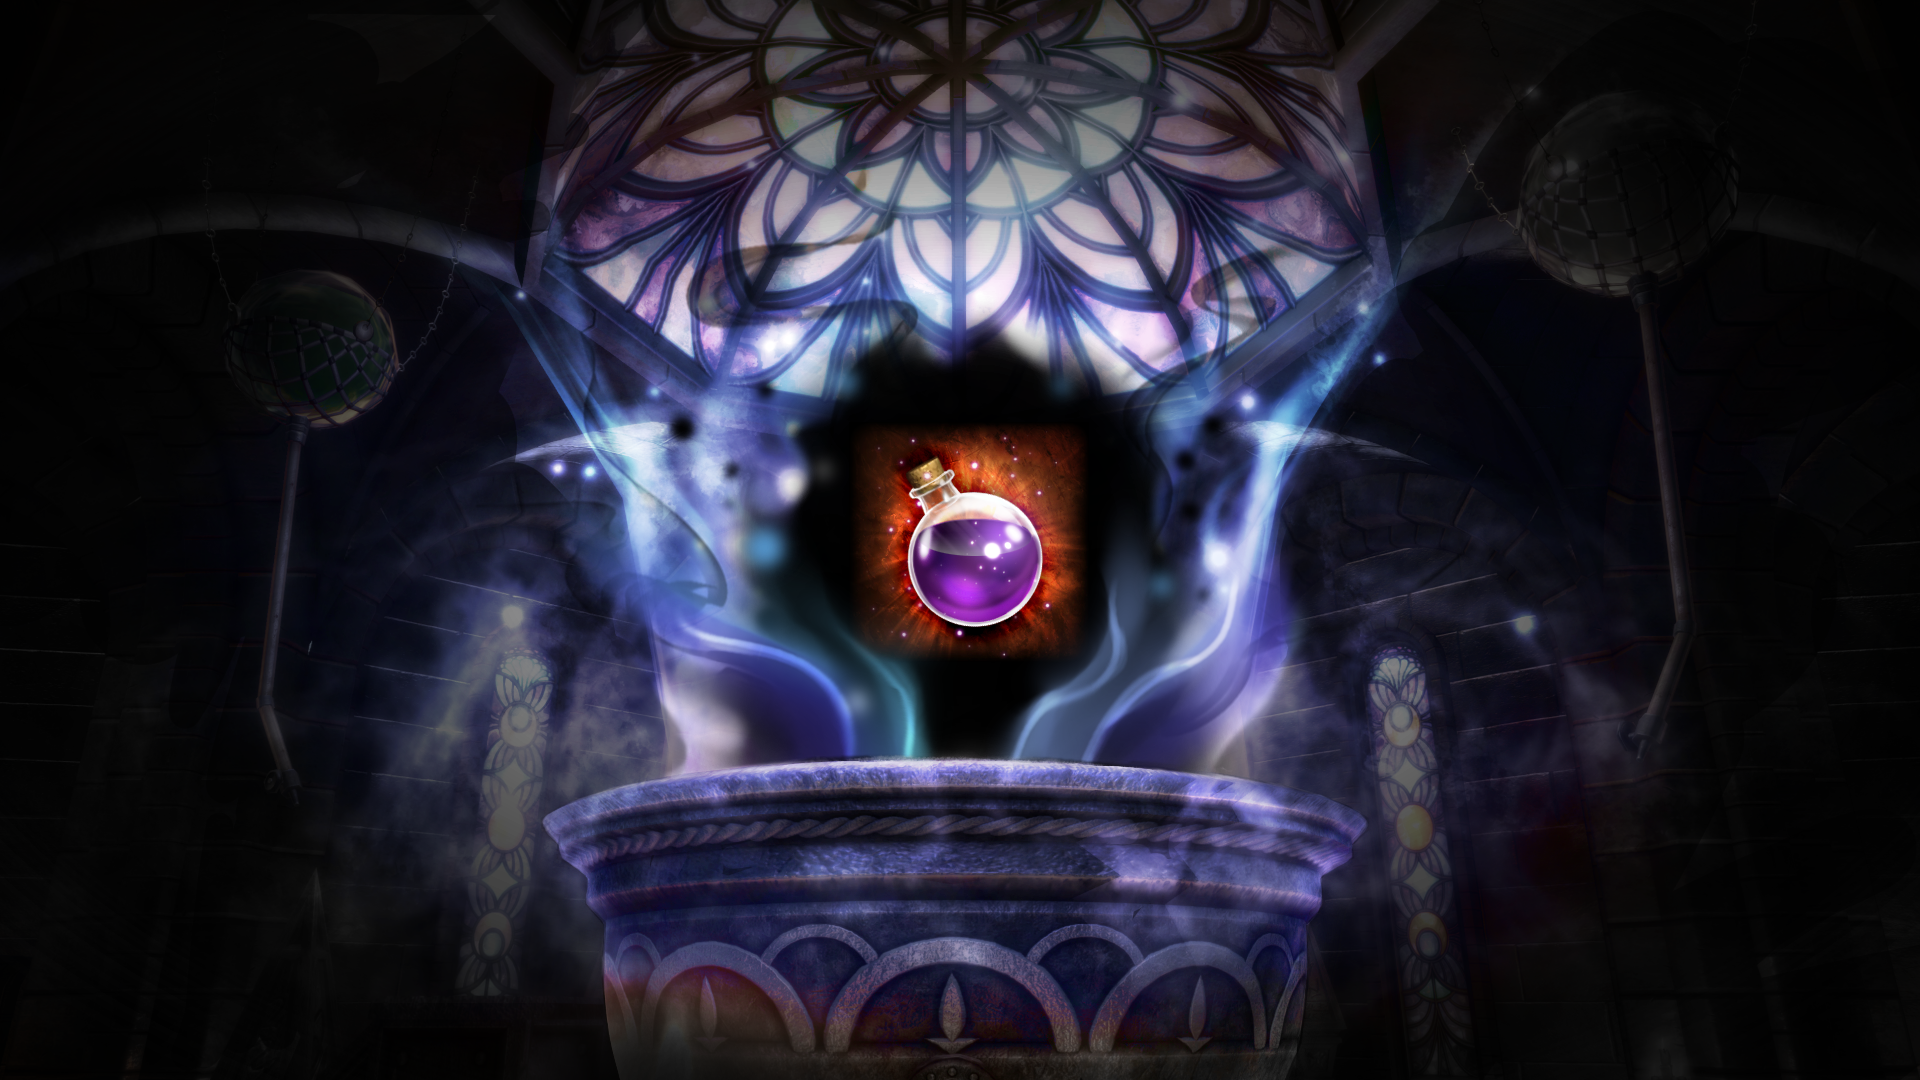 Icon for Elixir of Fate